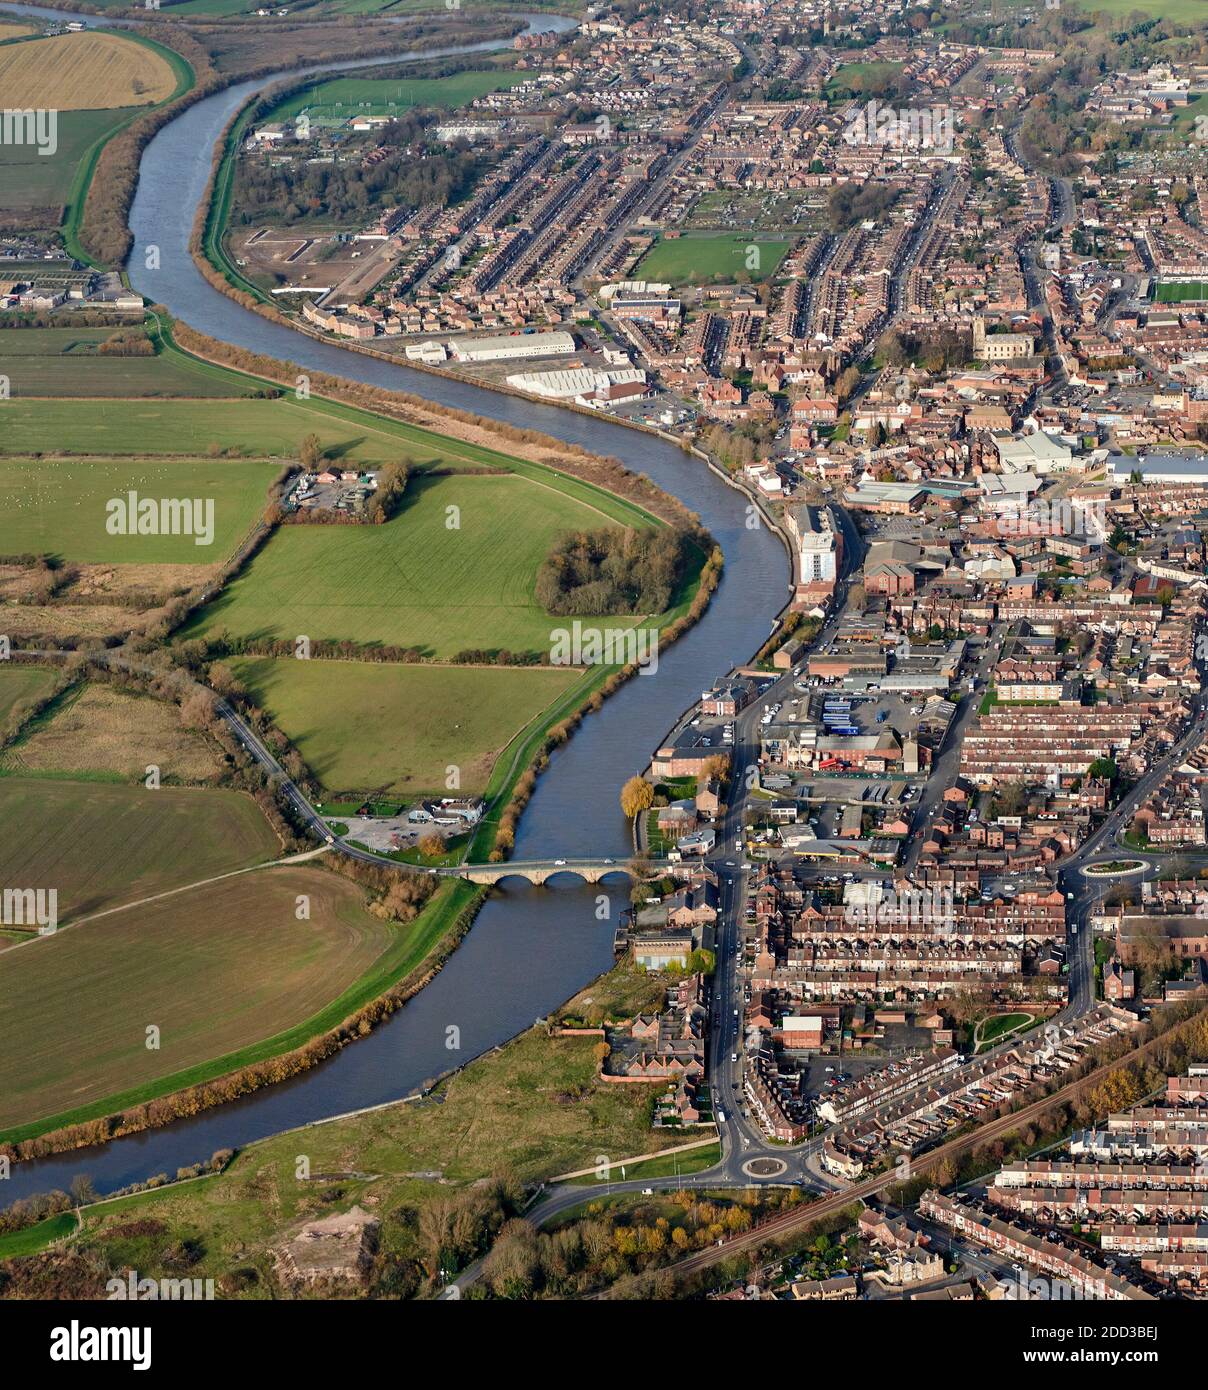 The rural community town of Gainsborough, on the River Trent, northern England, UK Stock Photo